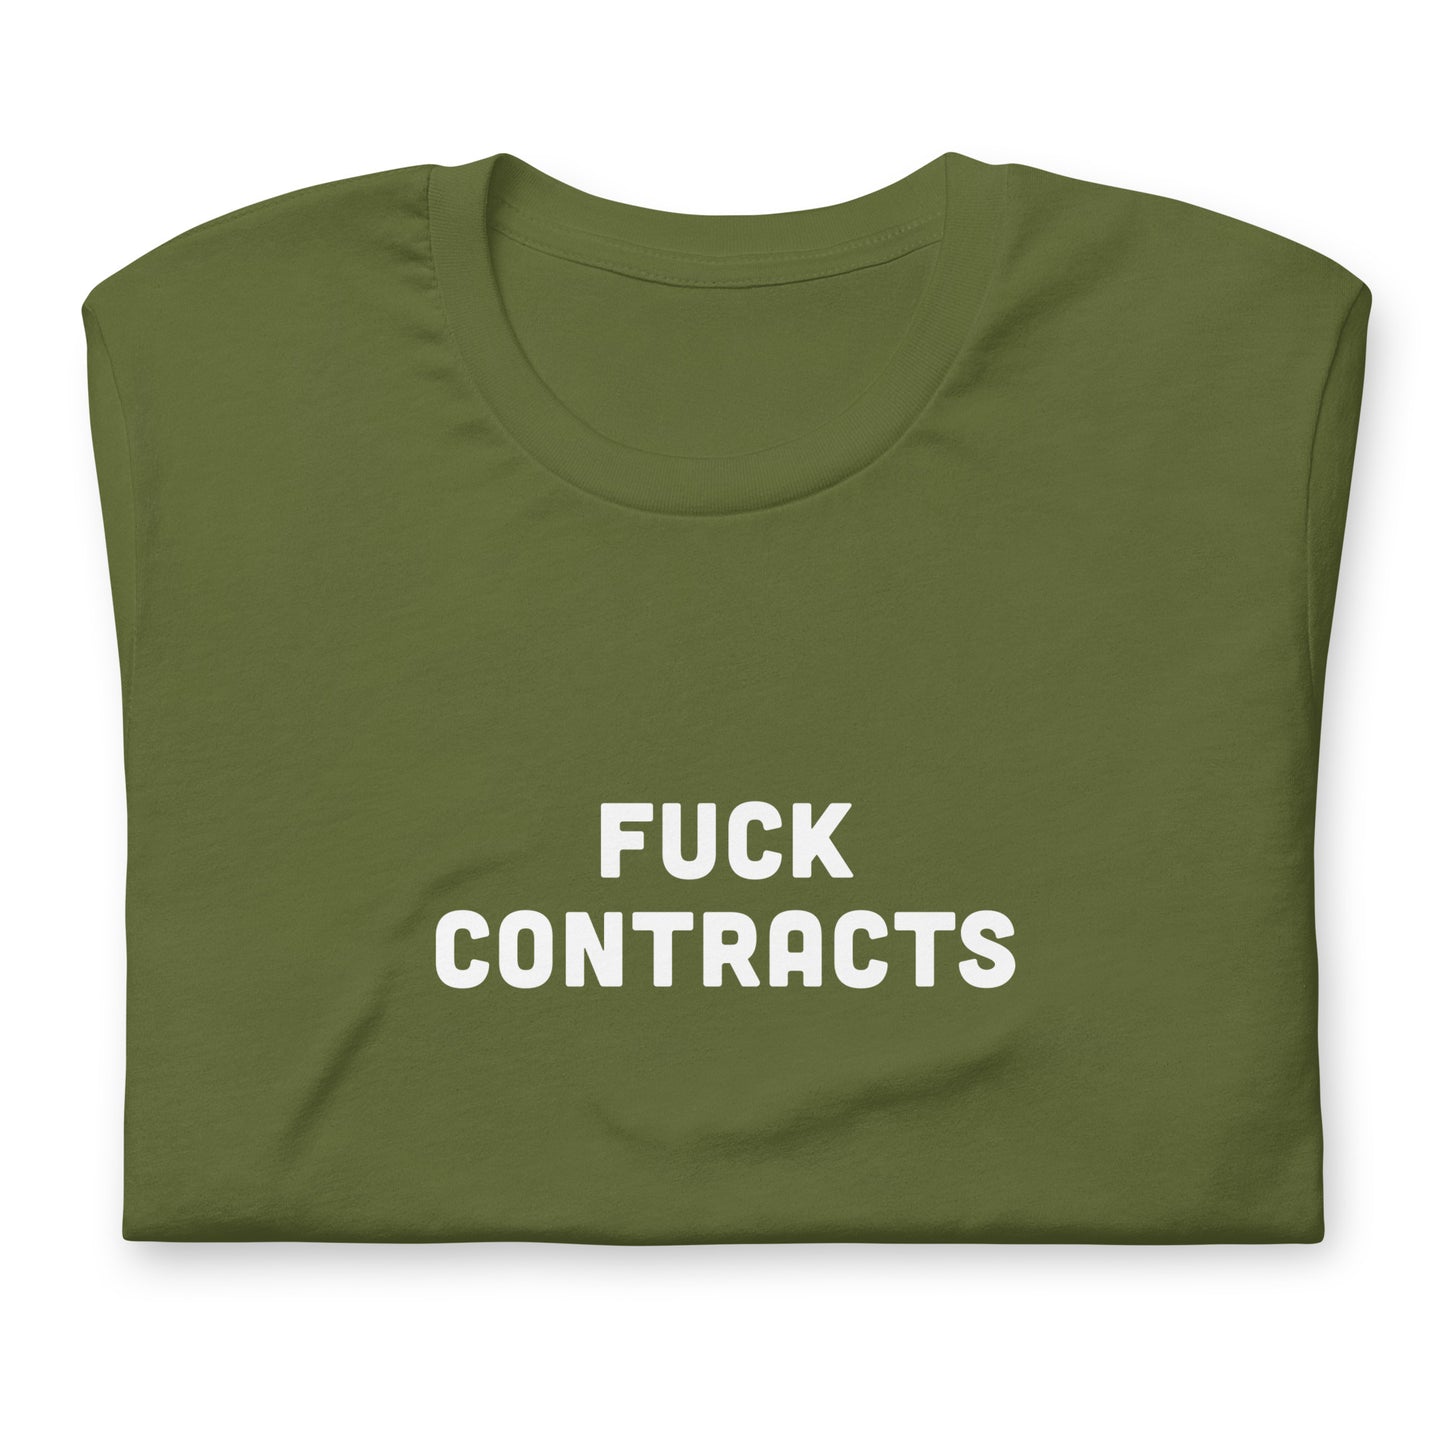 Fuck Contracts T-Shirt Size S Color Navy